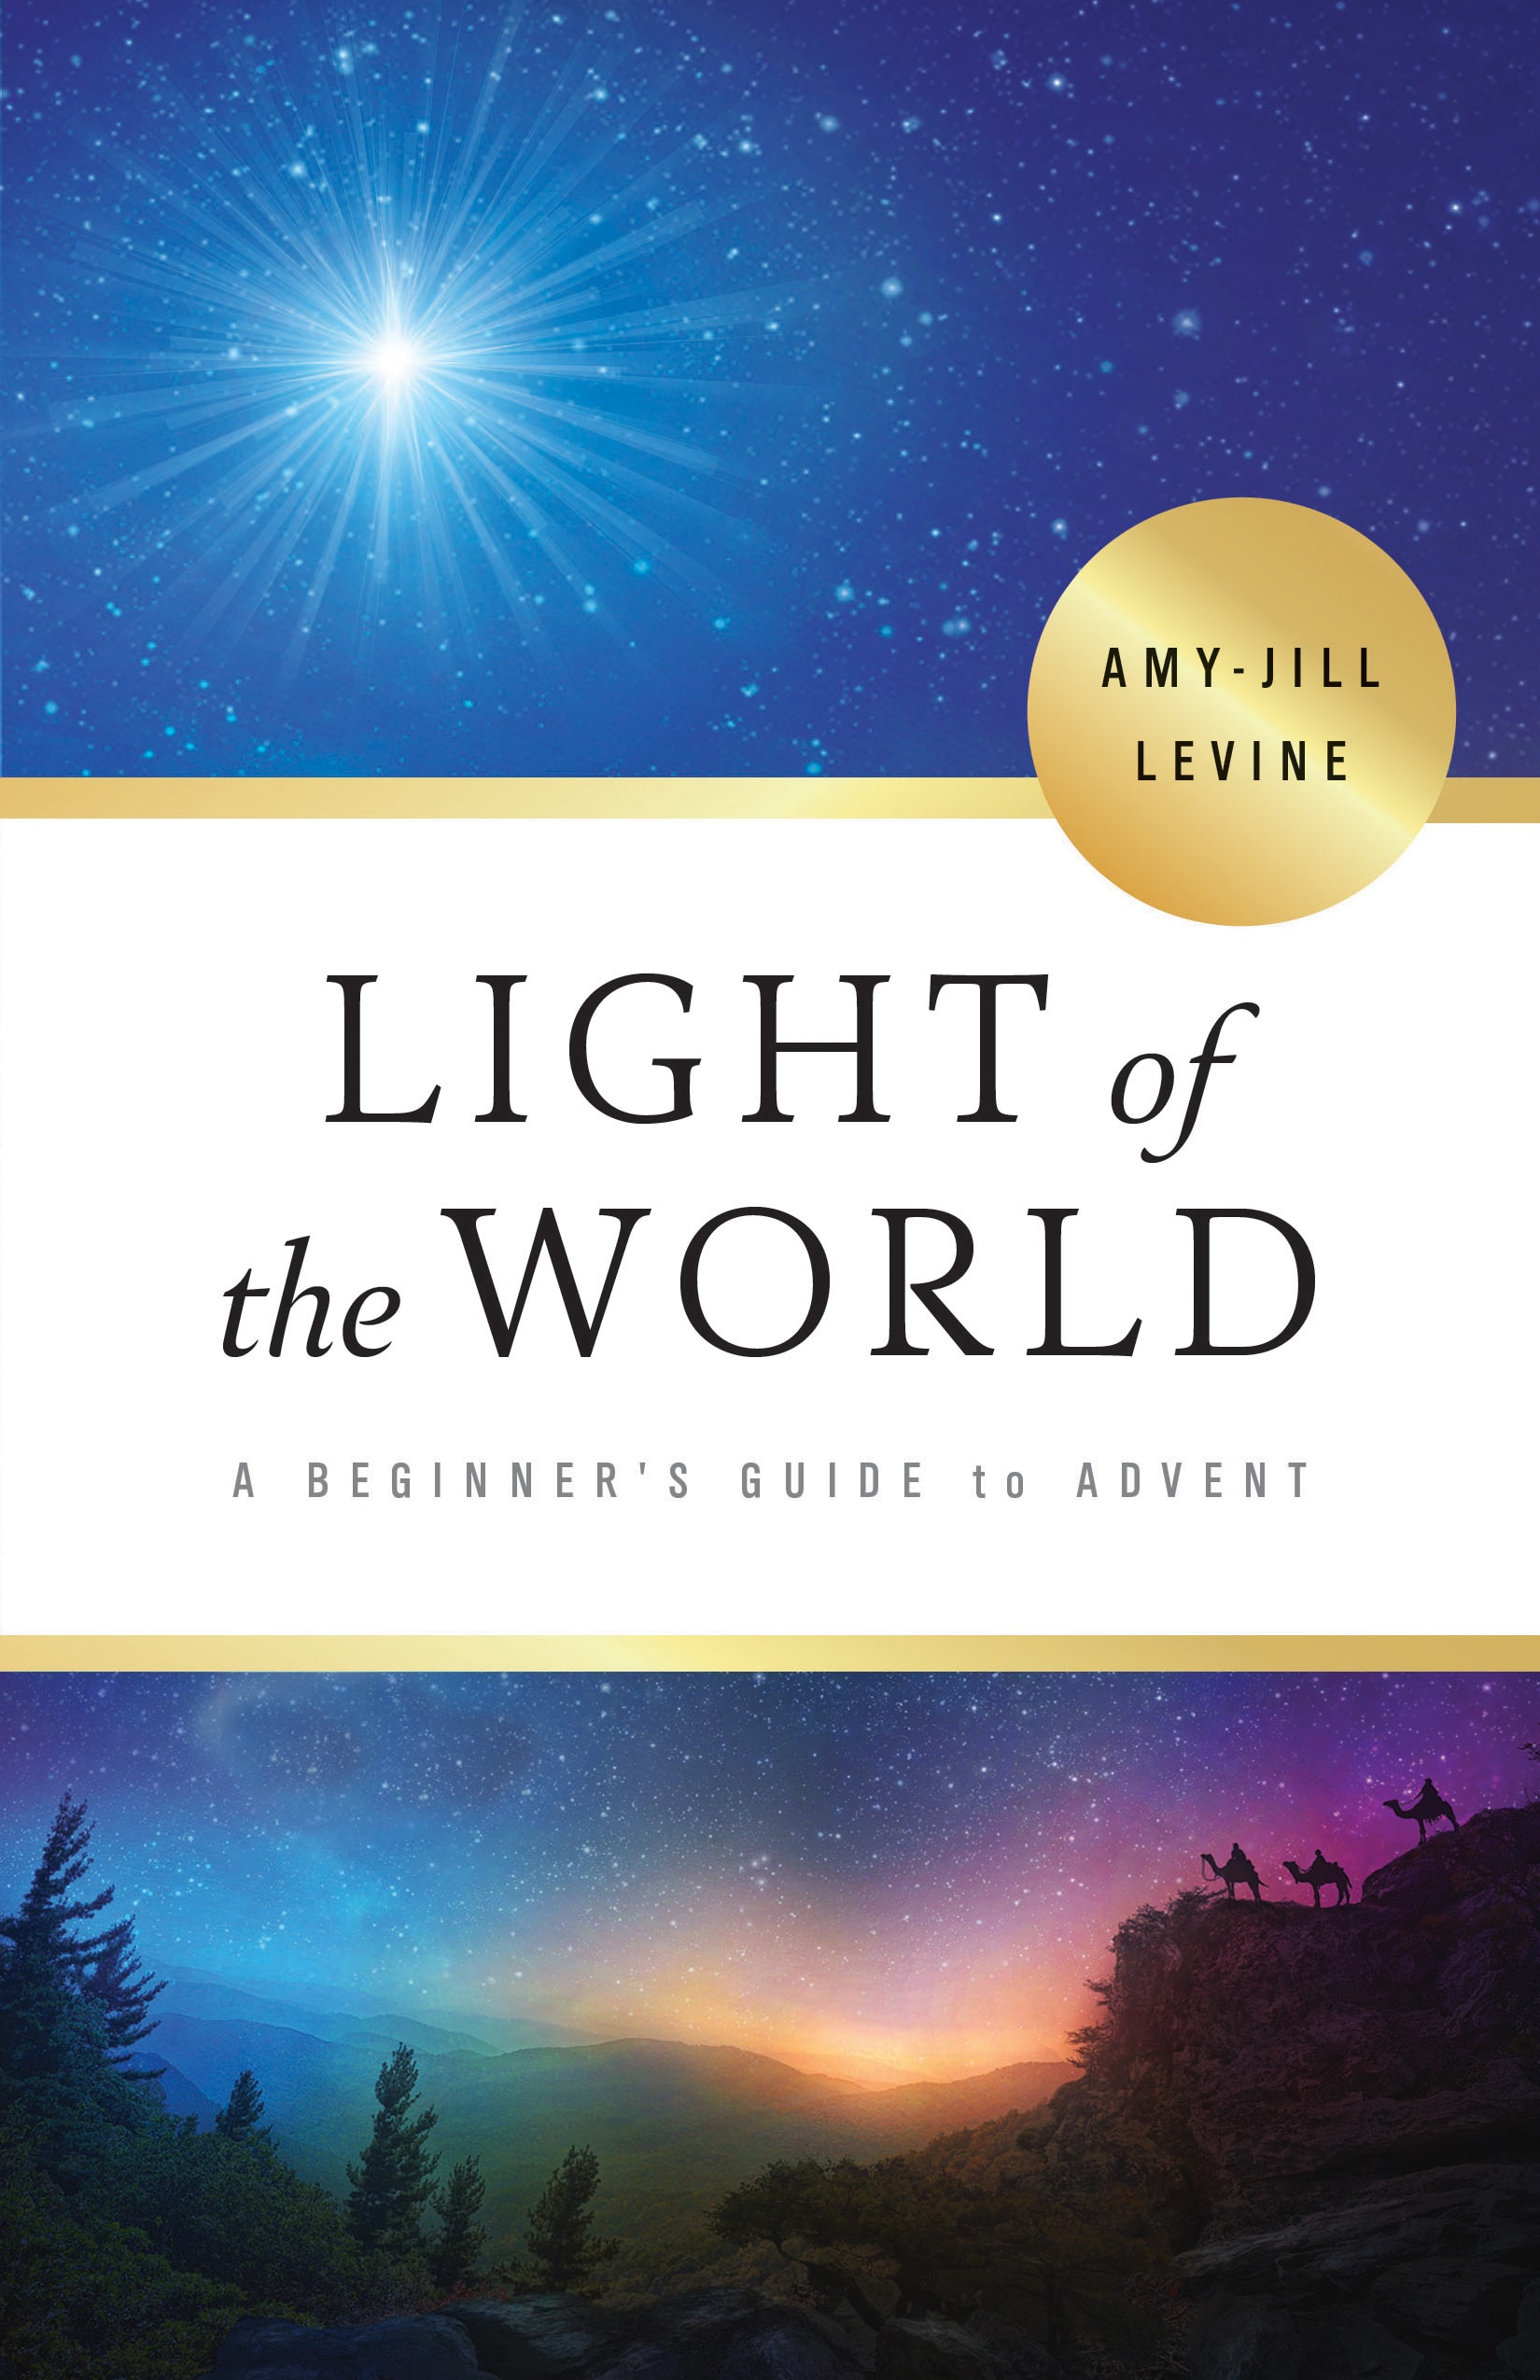 Light of the World: A Beginner's Guide to Advent by Amy-Jill Levine